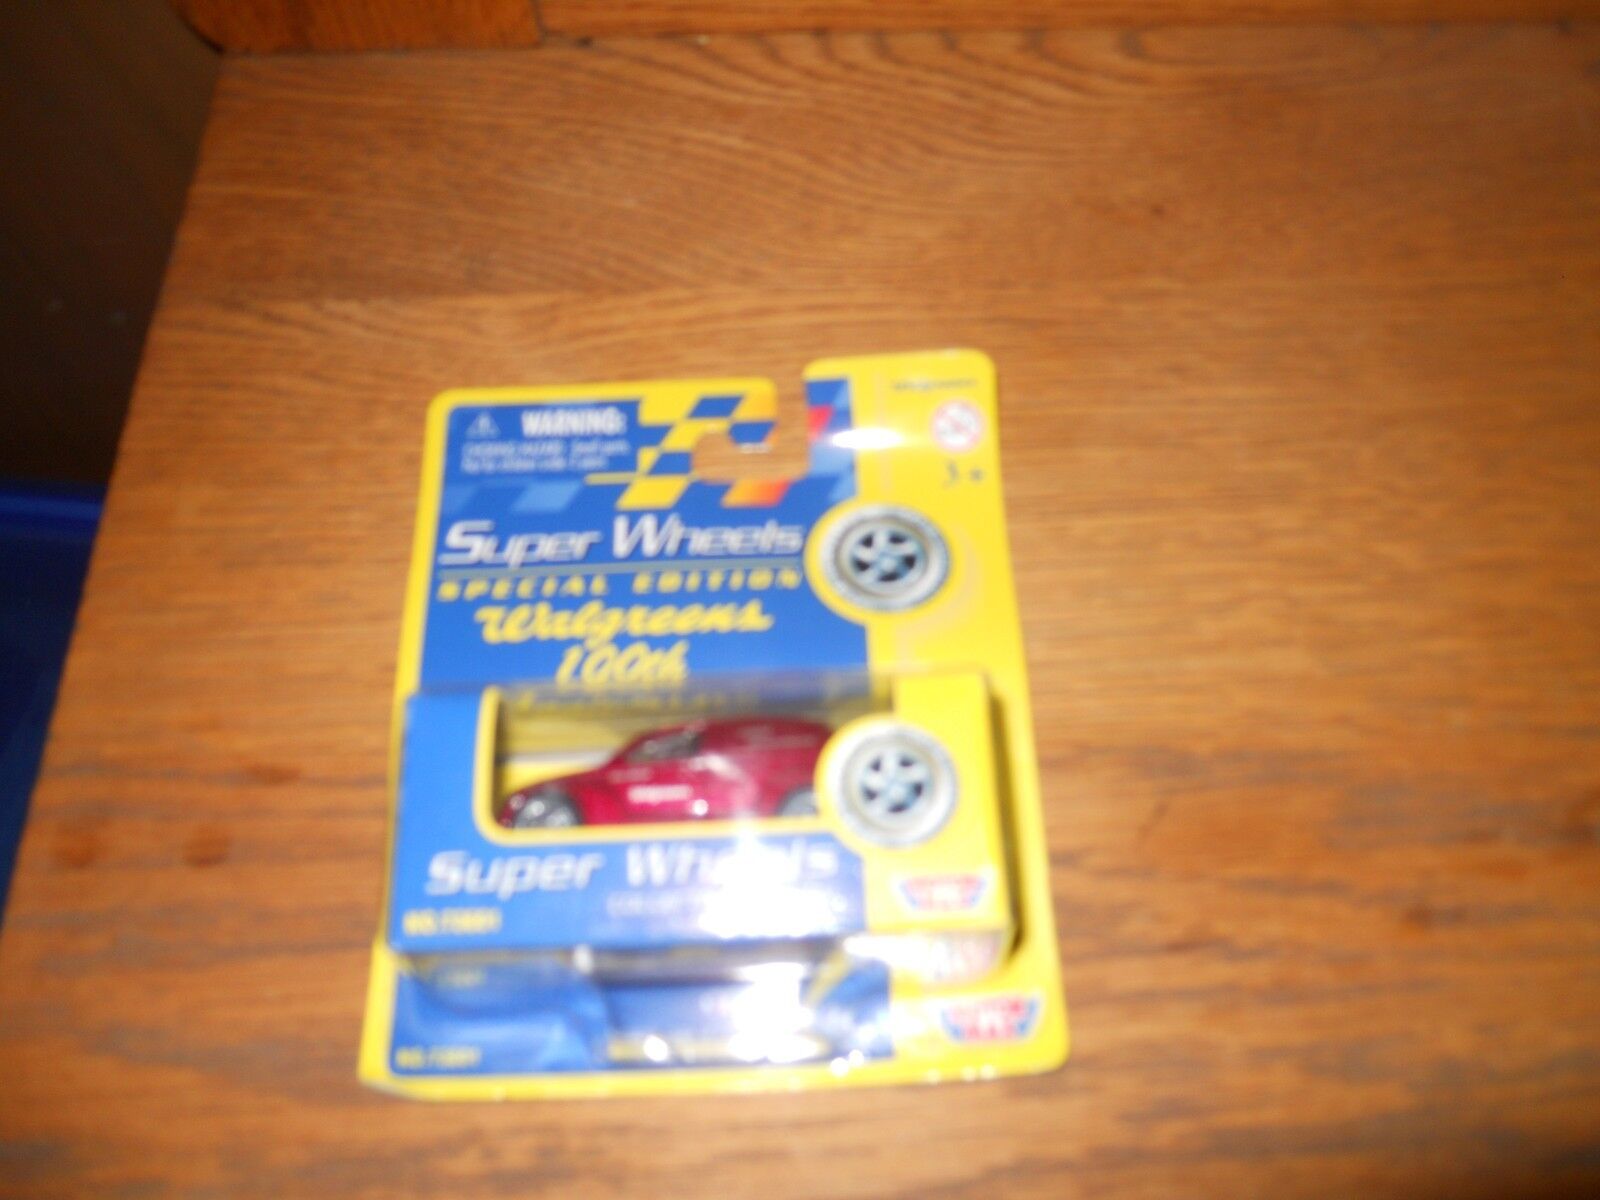 Super Wheels Die-Cast Special Edition Walgreens 100th Anniversary Toy Cars  Hot | eBay